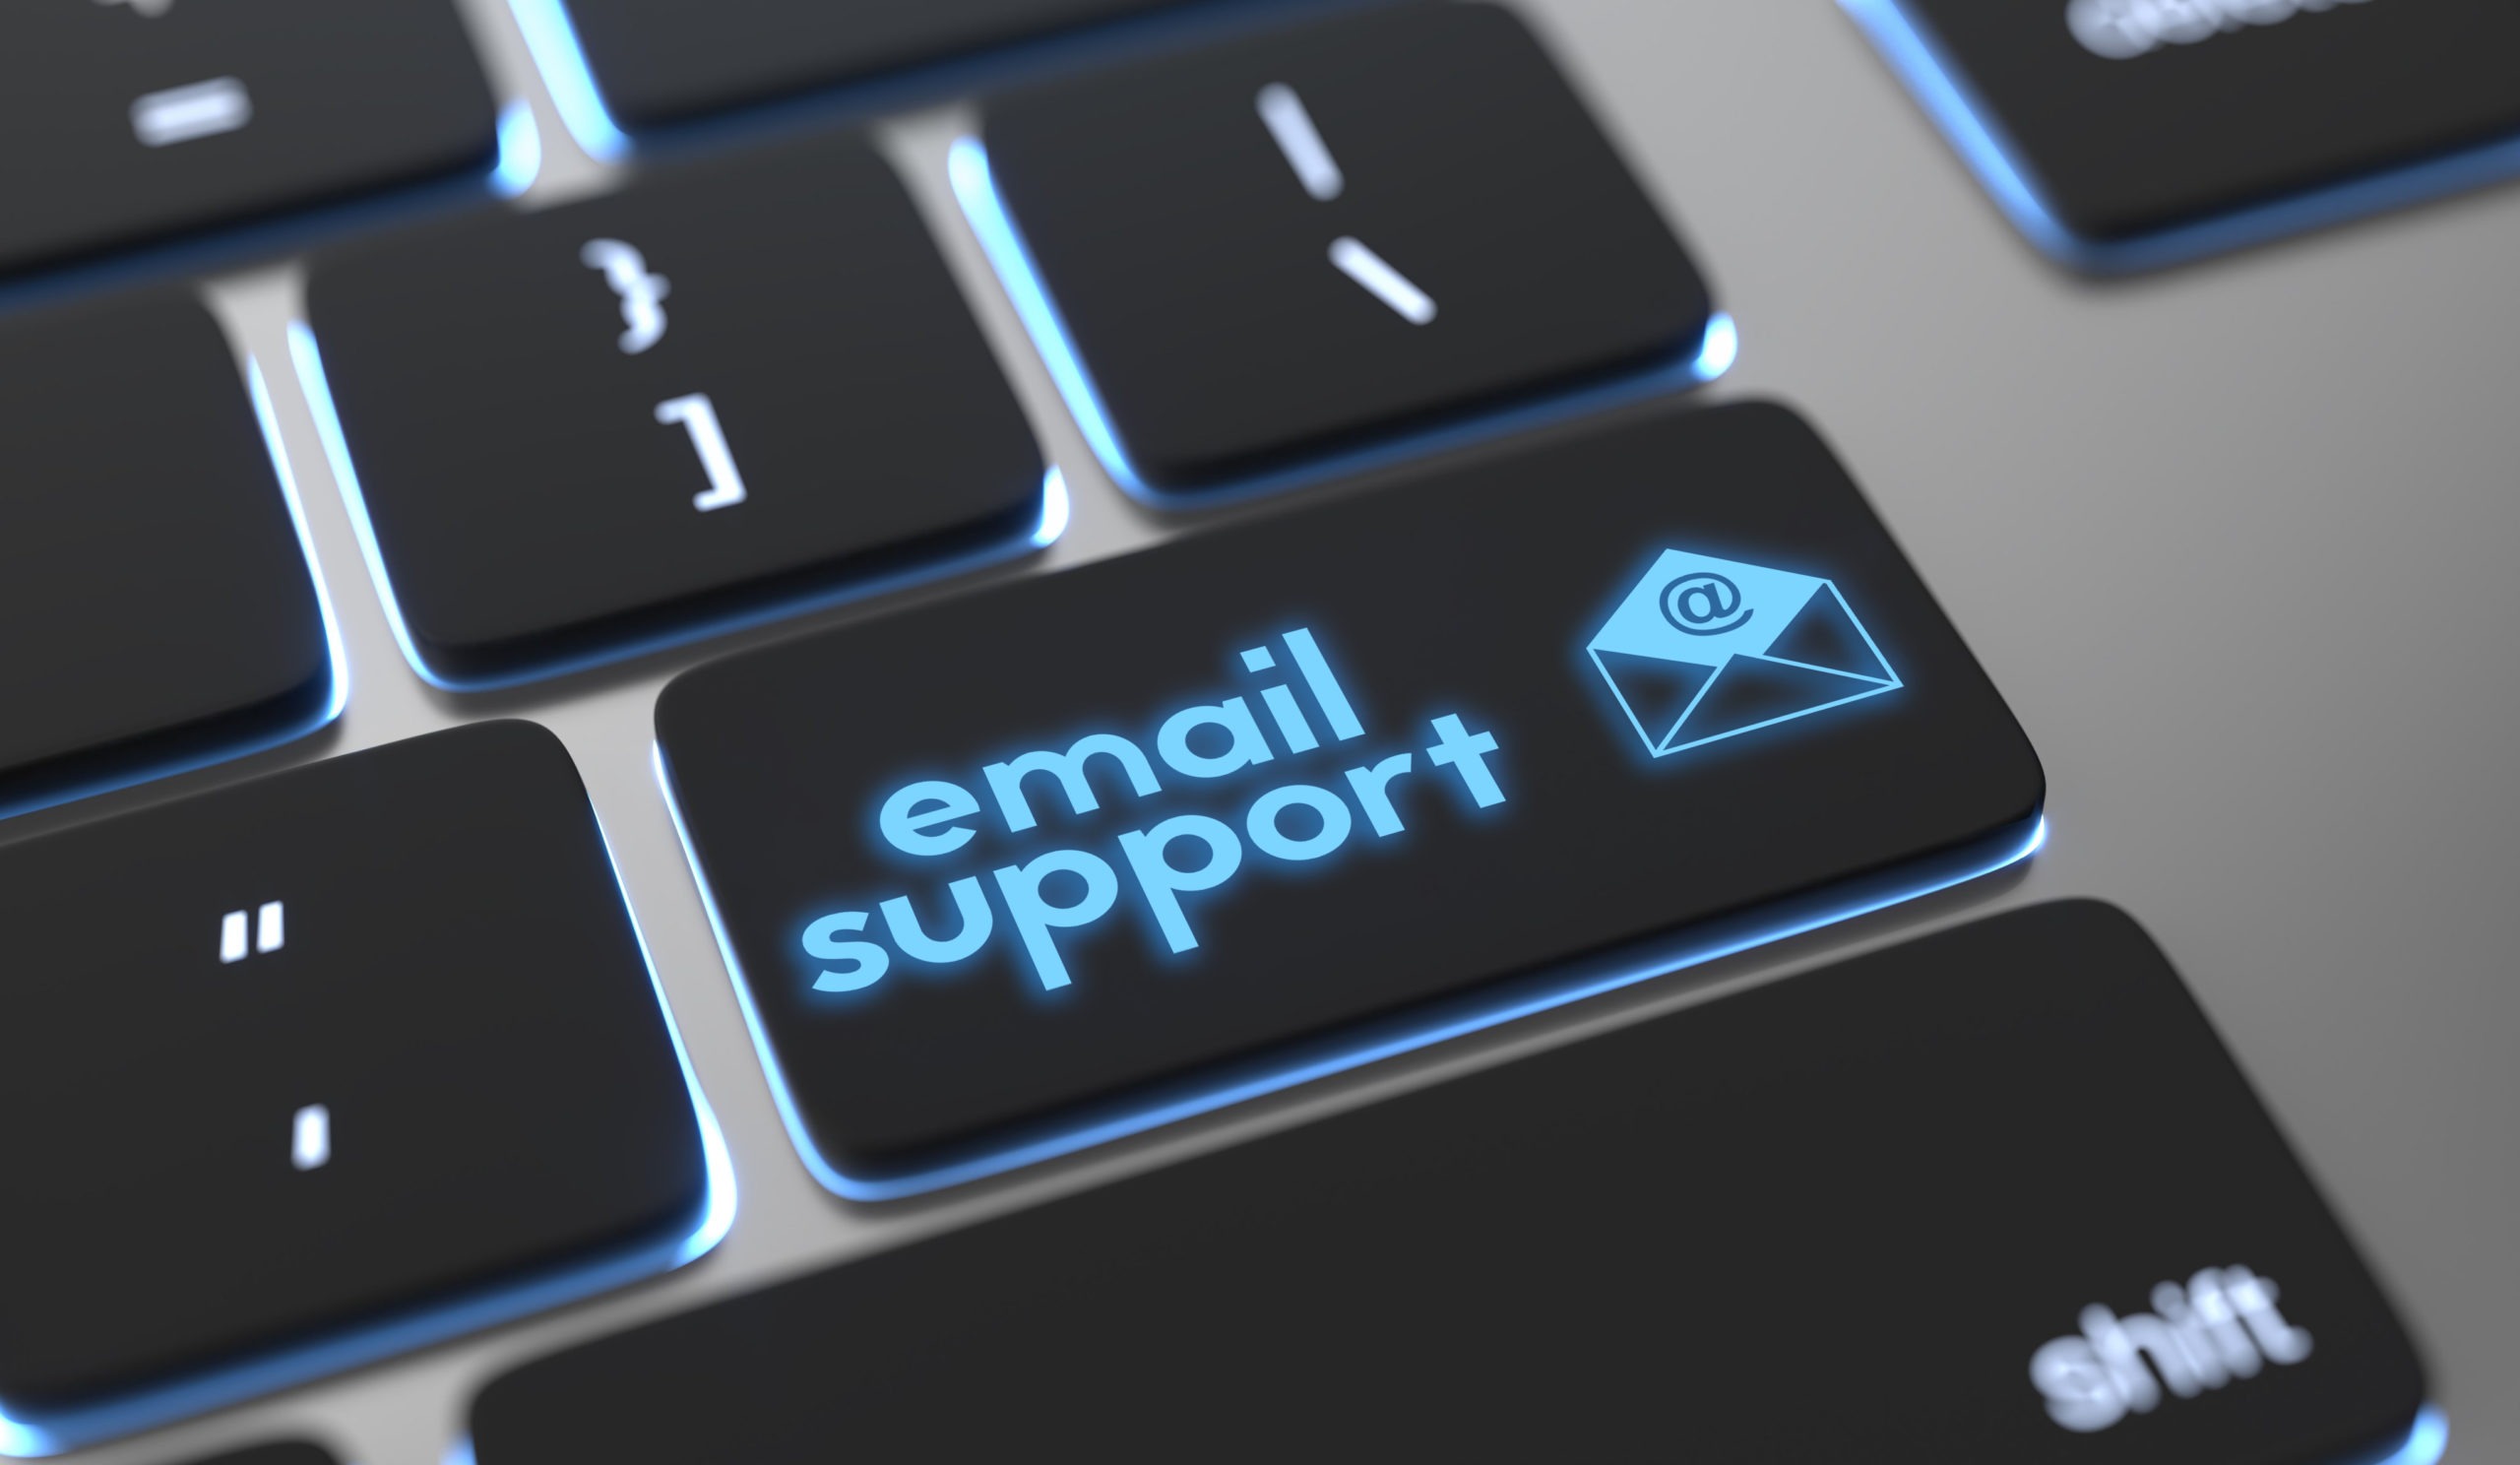 Email-support